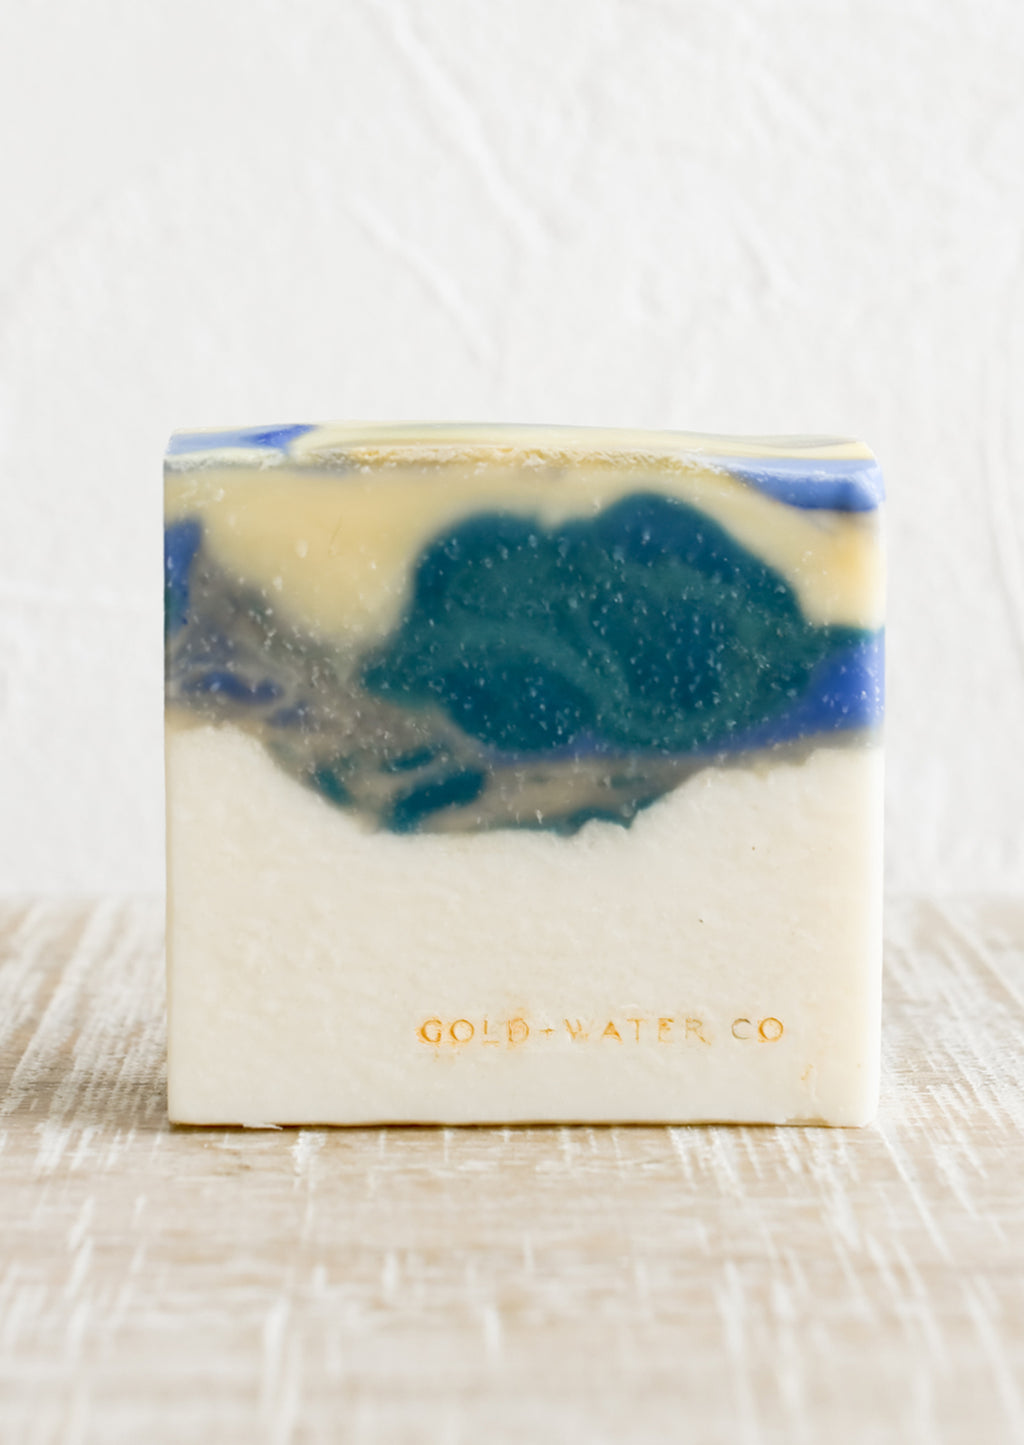 Wild Stems: A bar of soap in ivory, yellow and blue.